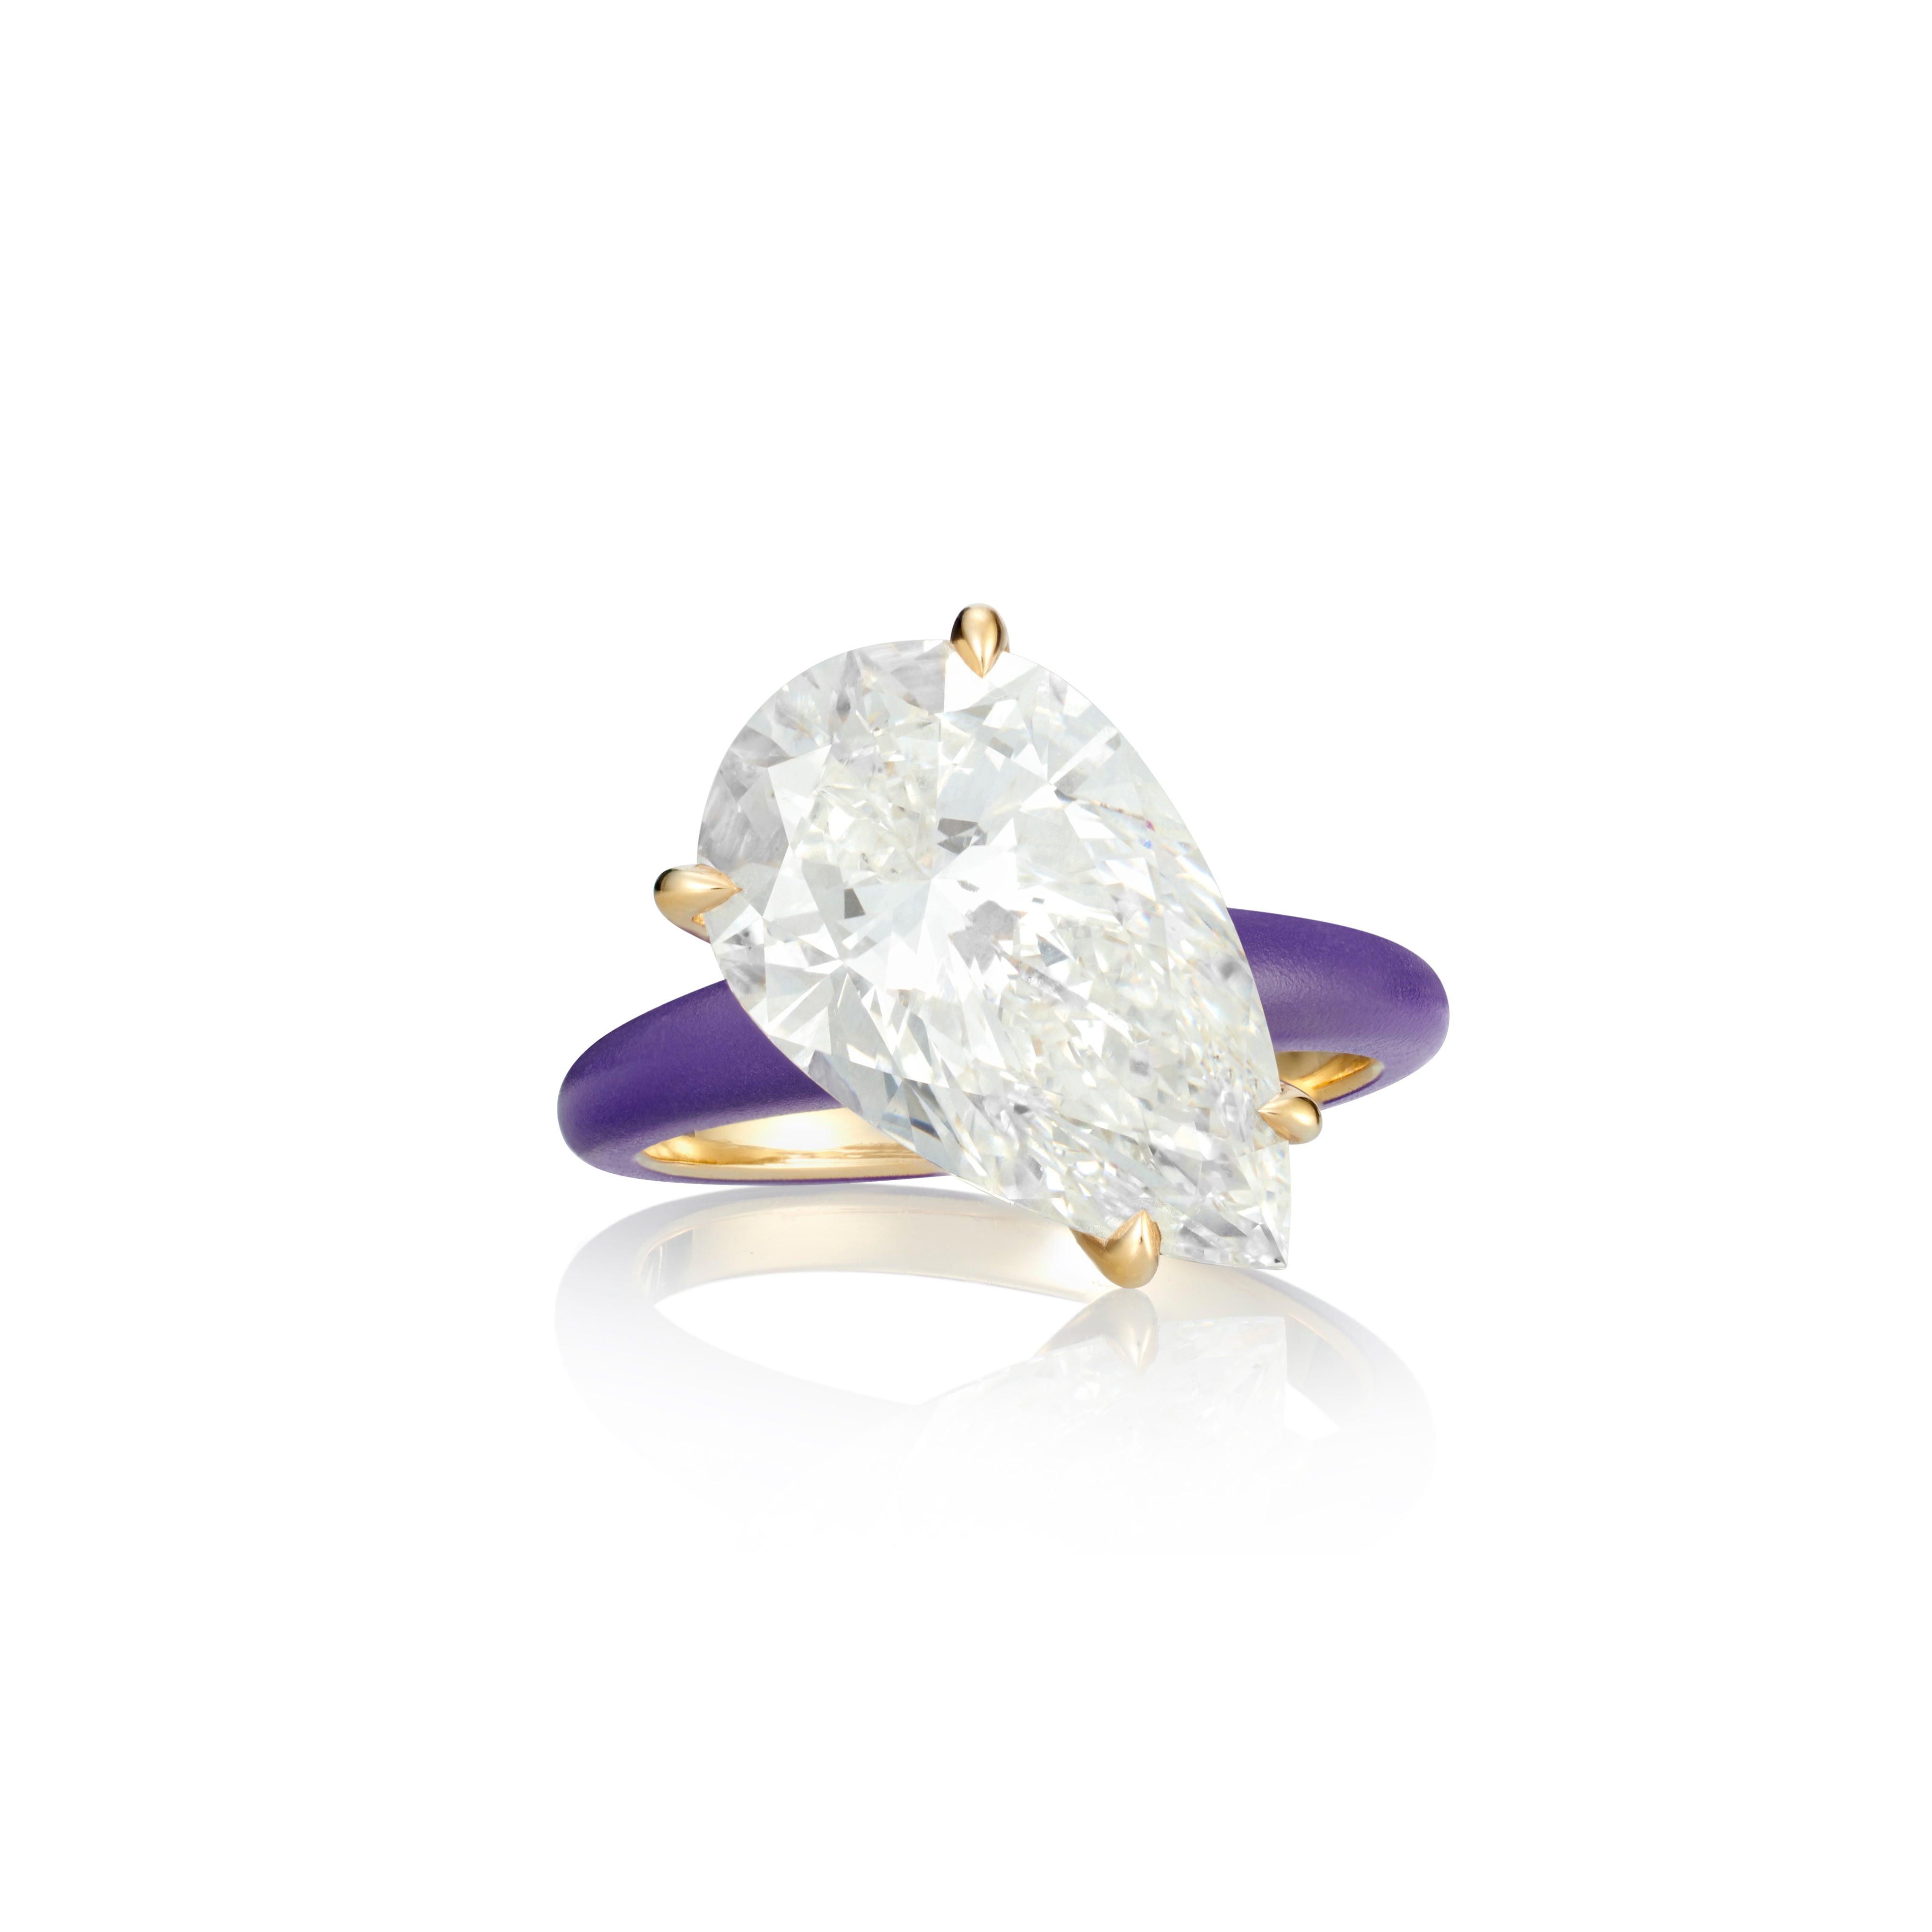 The Off-Axis Pear Diamond Ring